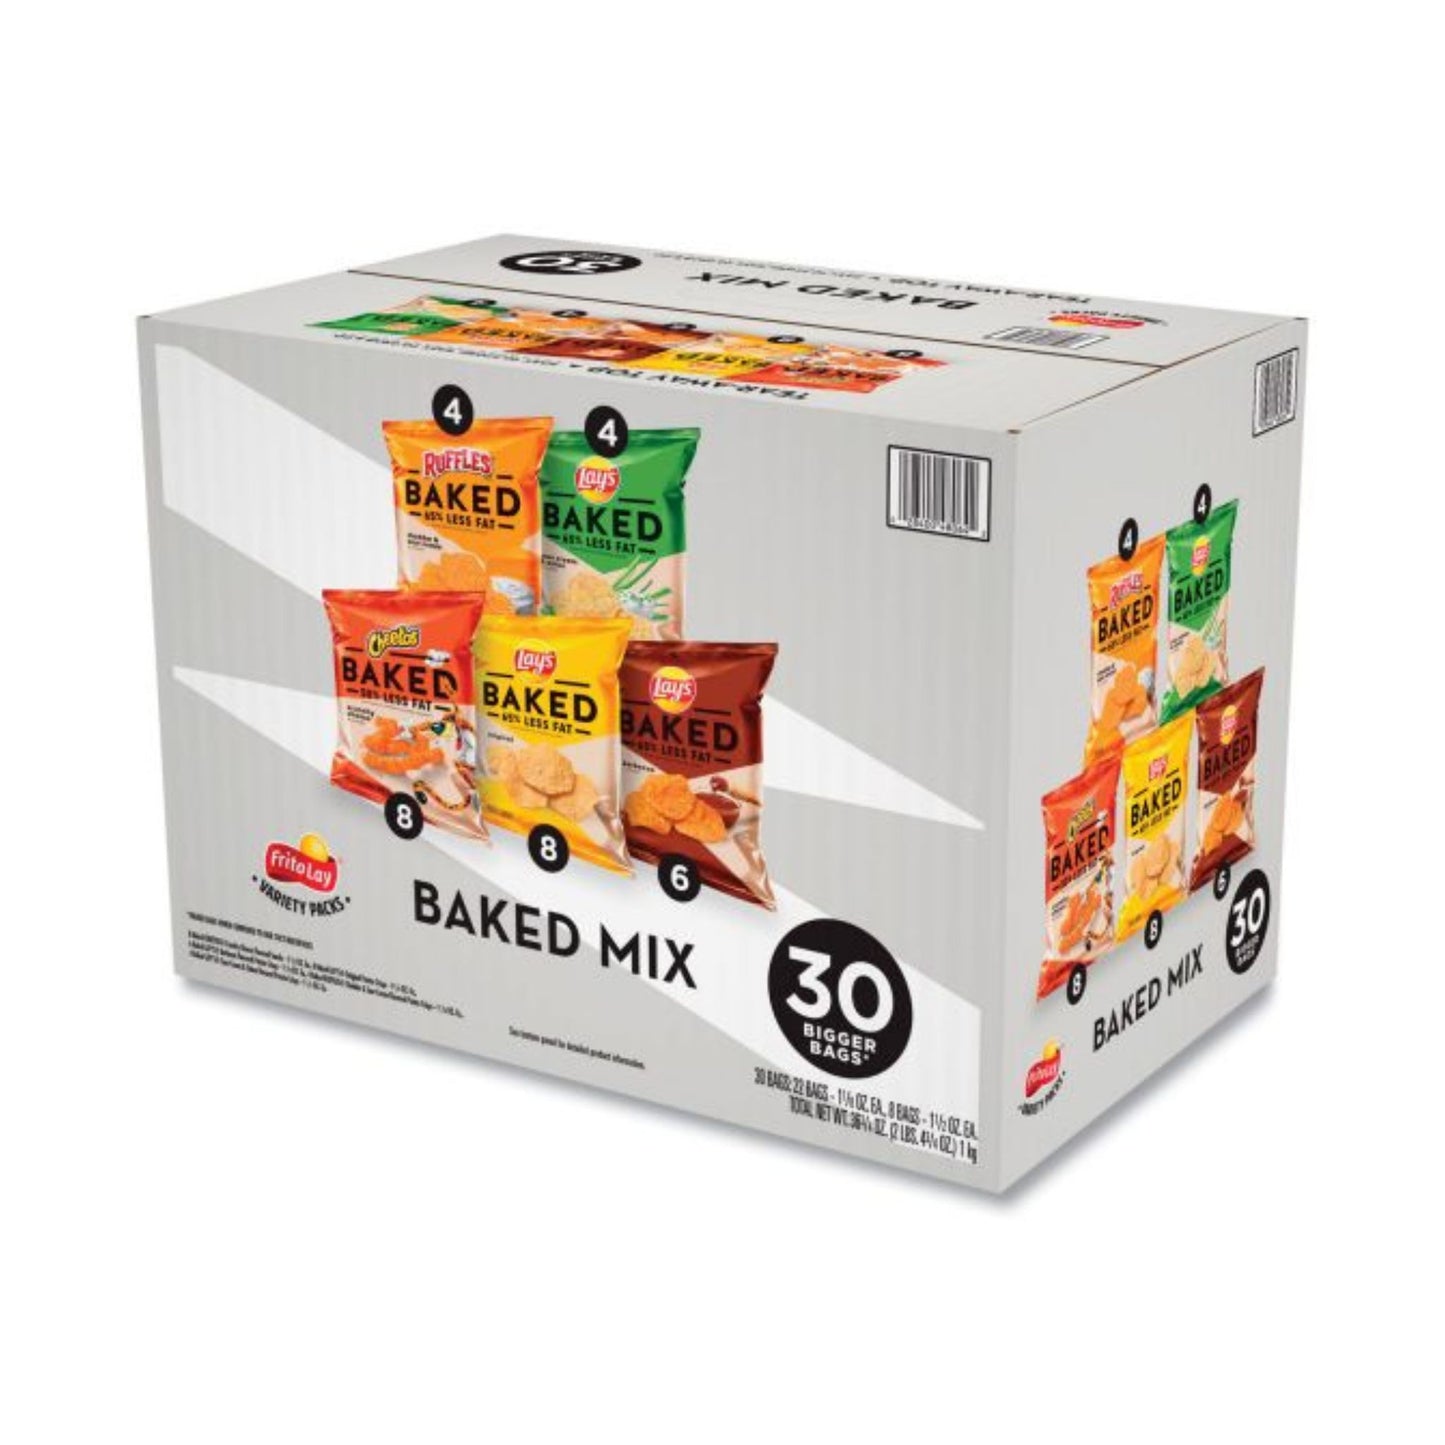 Frito-Lay Baked Mix Variety Pack 30bags per Pack